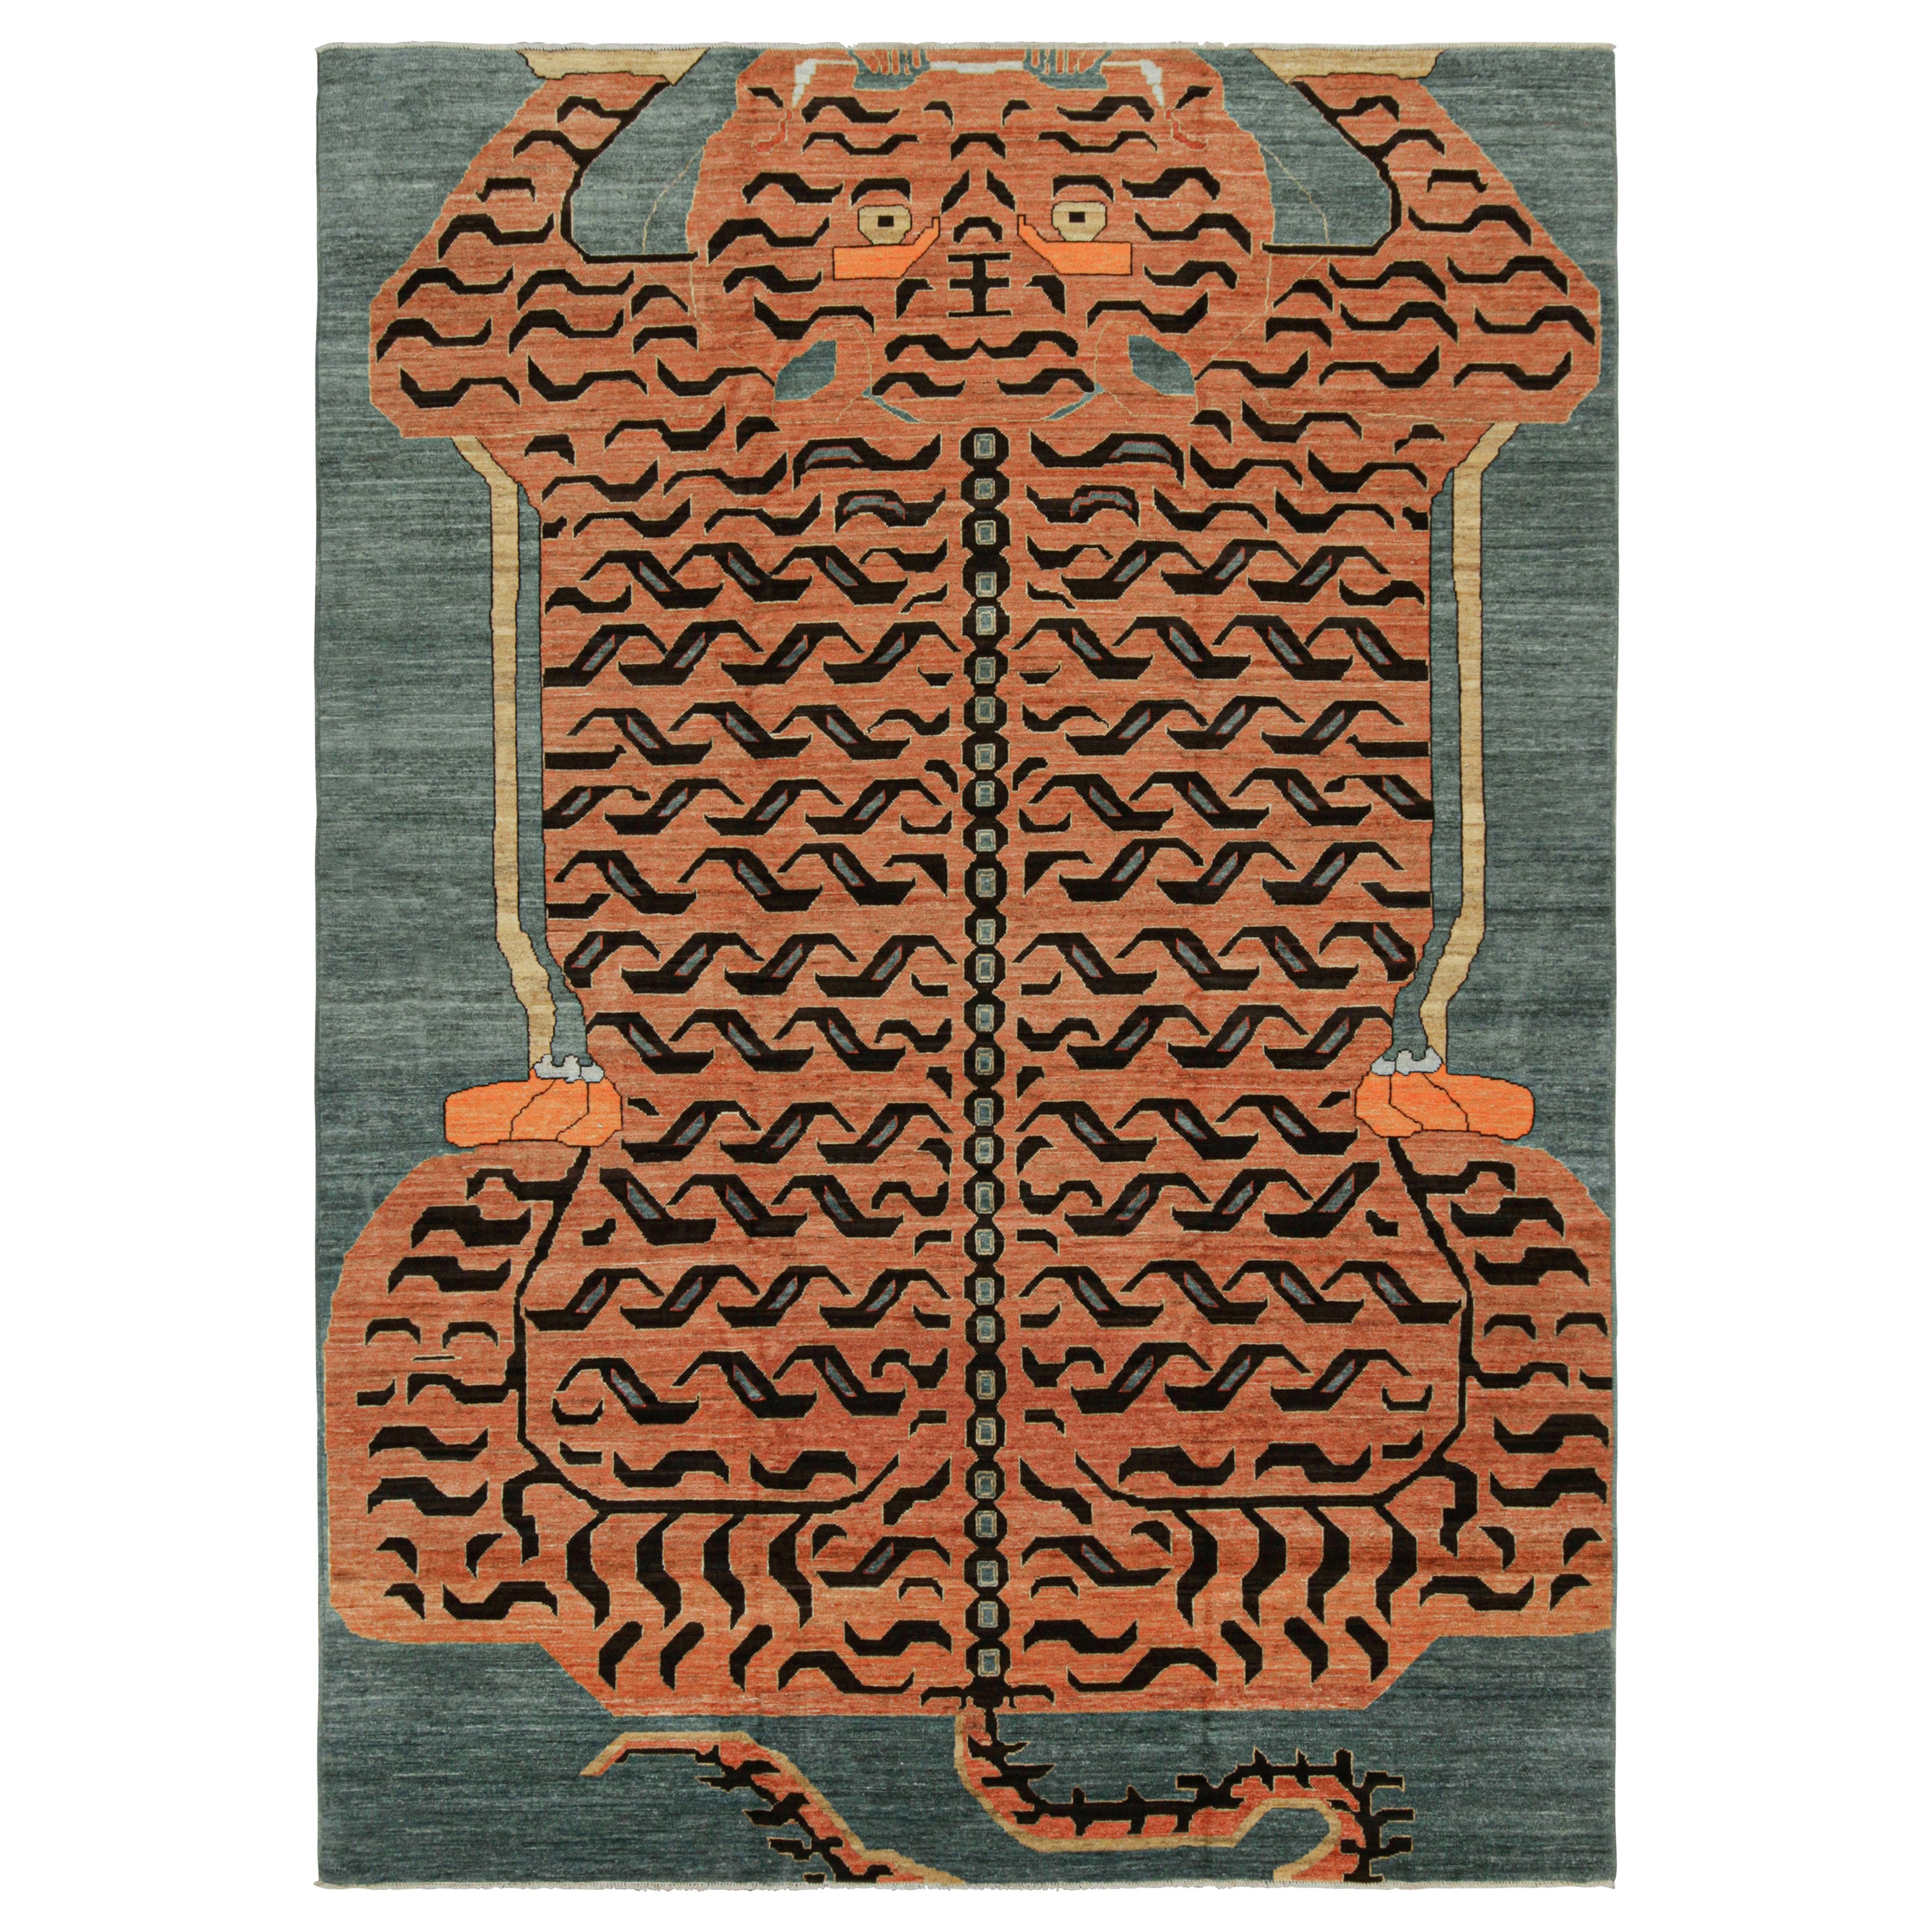 Rug & Kilim’s Classic-Style Tiger-Skin Rug Design with Orange & Brown Pictorial